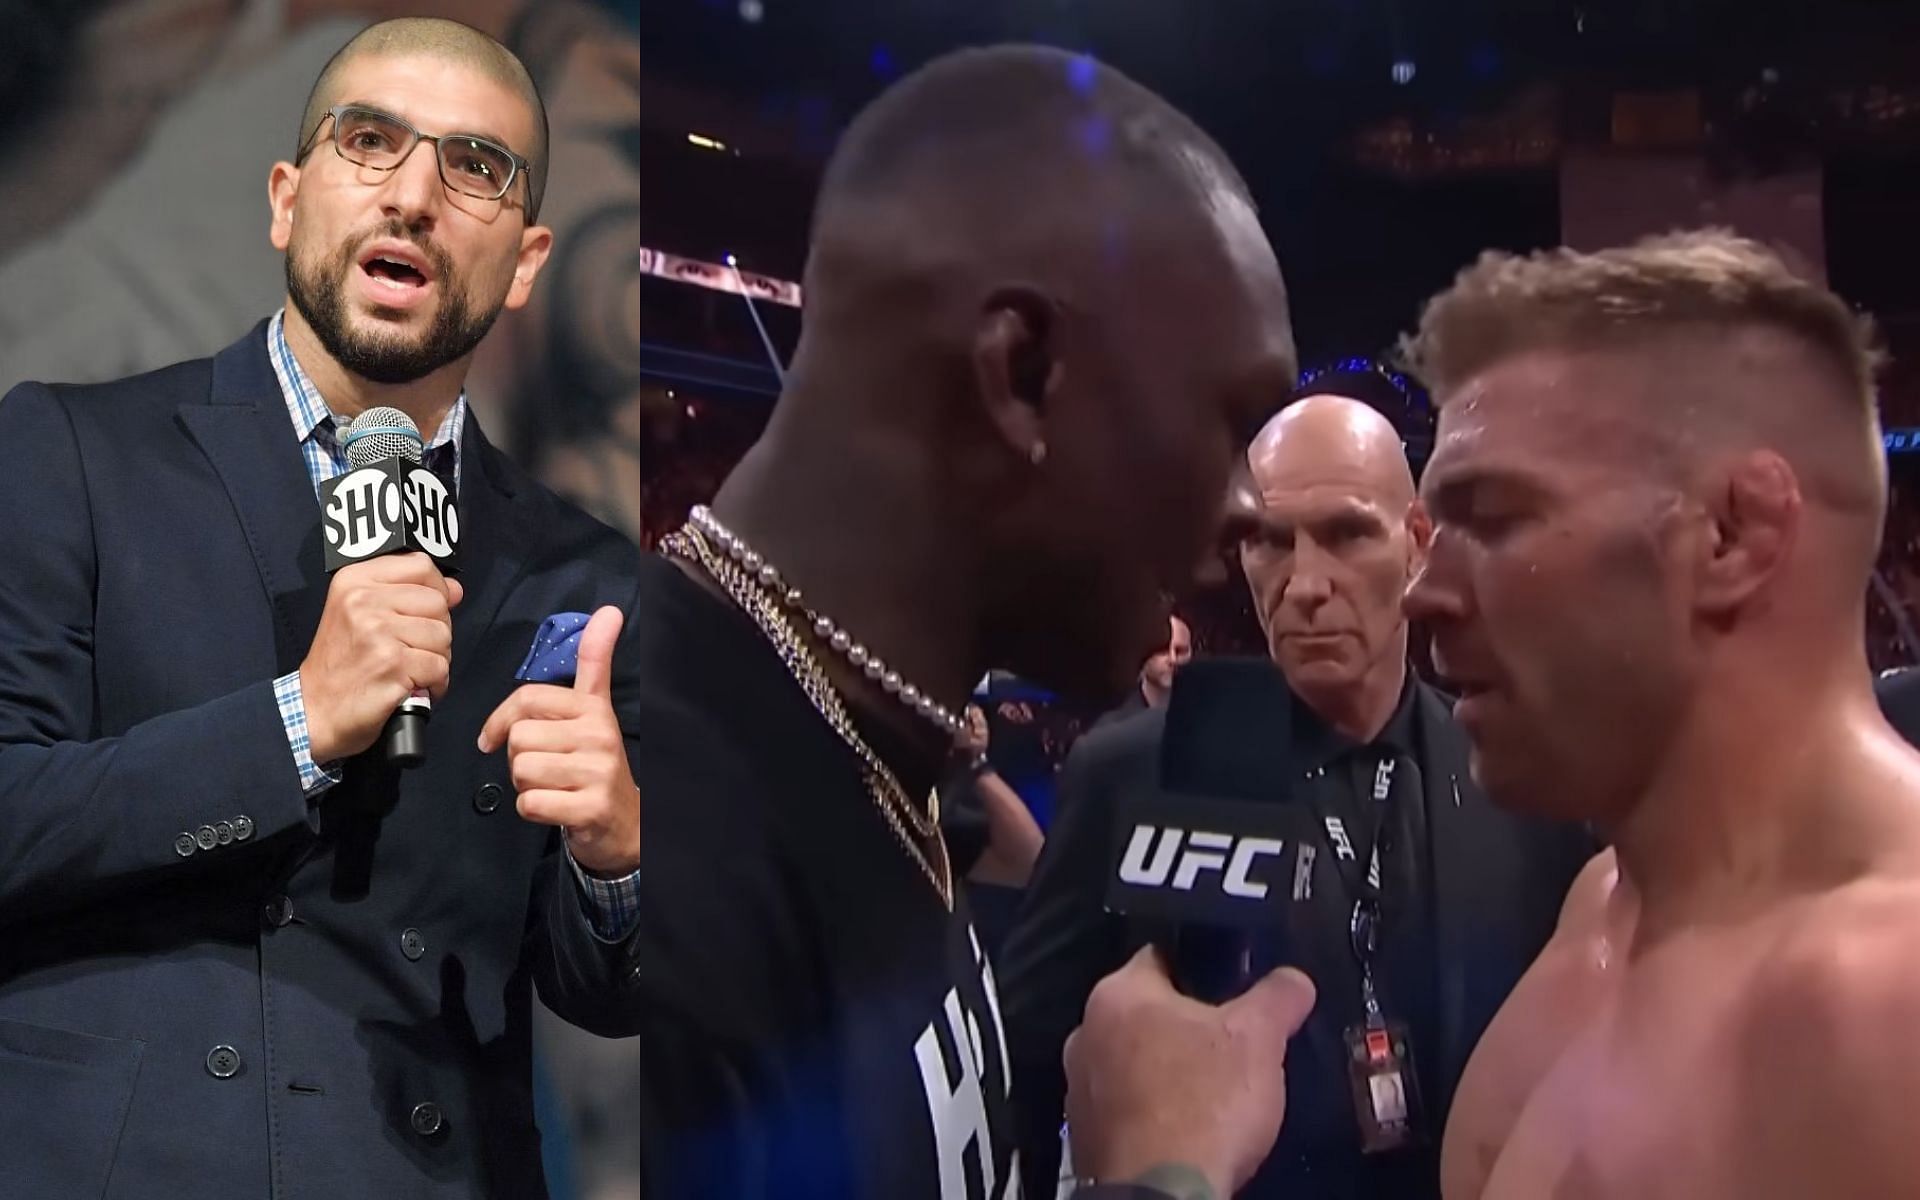 Ariel Helwani refutes rumors of Dricus du Plessis vs. Israel Adesanya fight deal [Image courtesy: Getty Images, and UFC - YouTube]